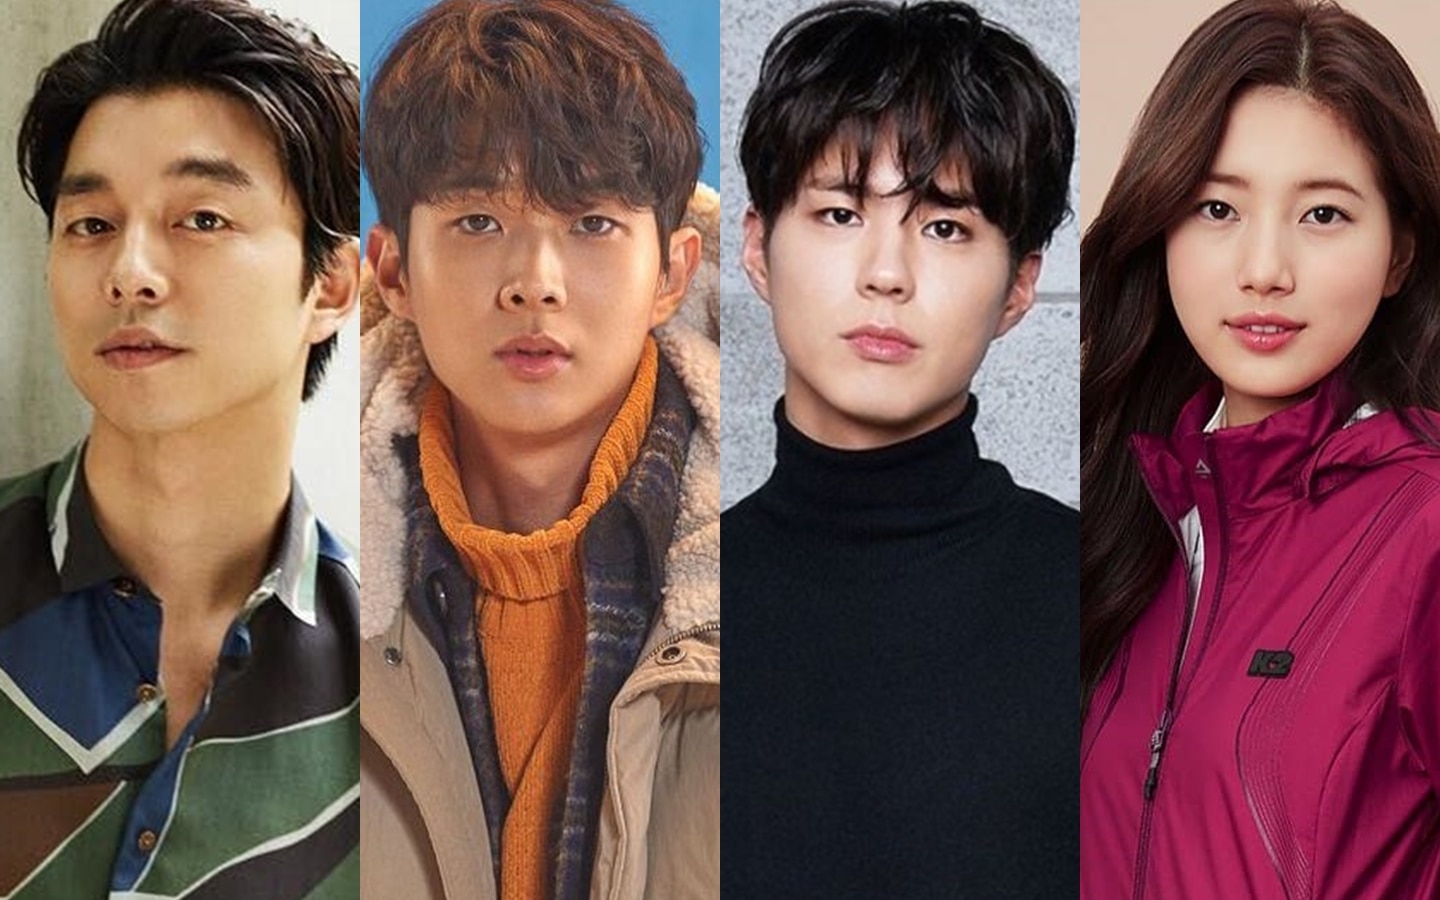 Gong Yoo, Choi Woo Shik, Park Bo Gum, And Bae Suzy In A Movie Project